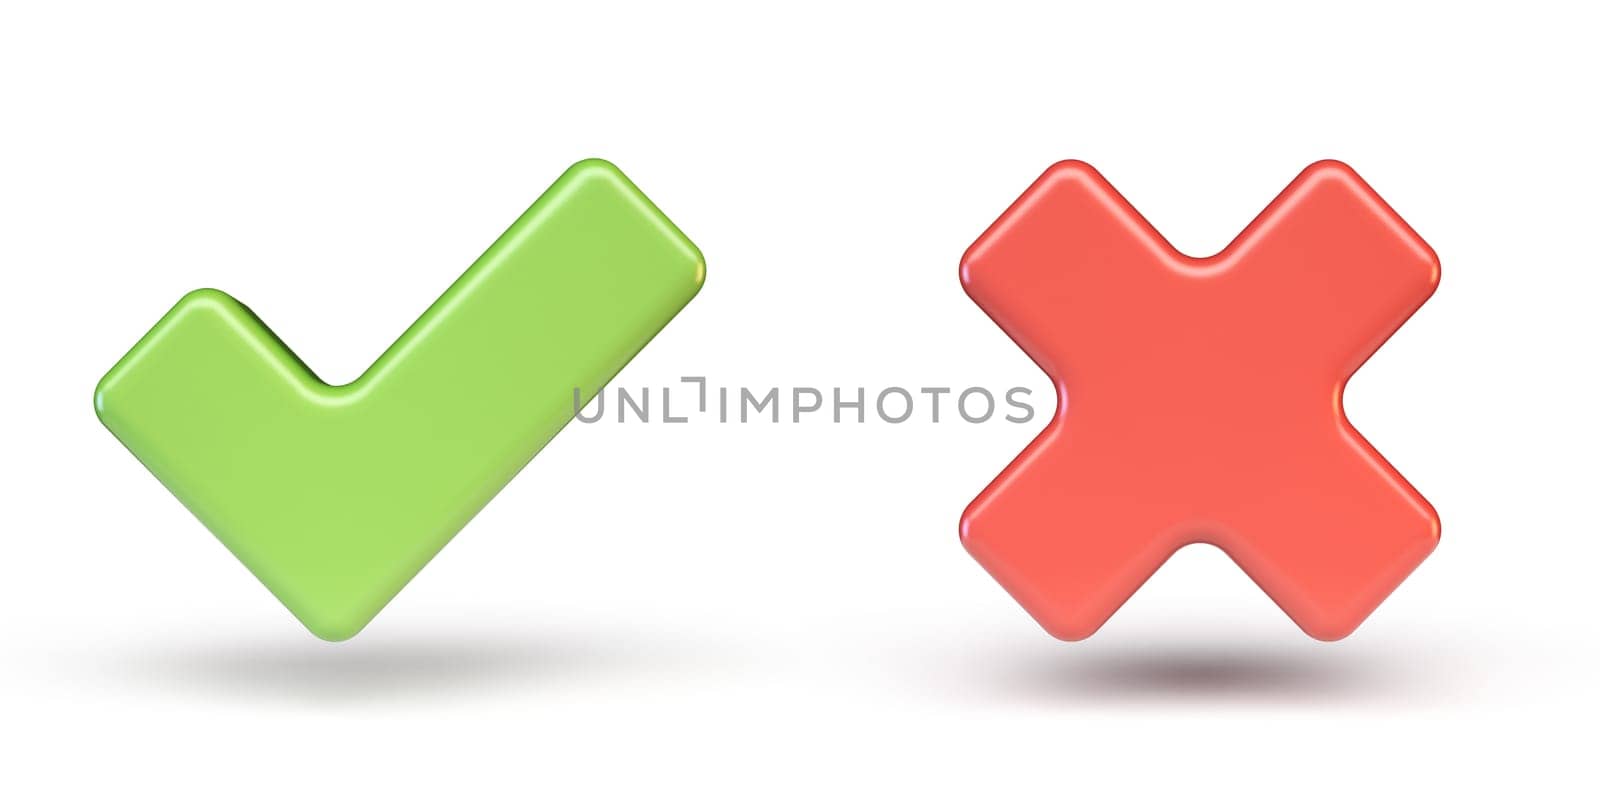 Green correct and red incorrect sign 3D rendering illustration isolated on white background